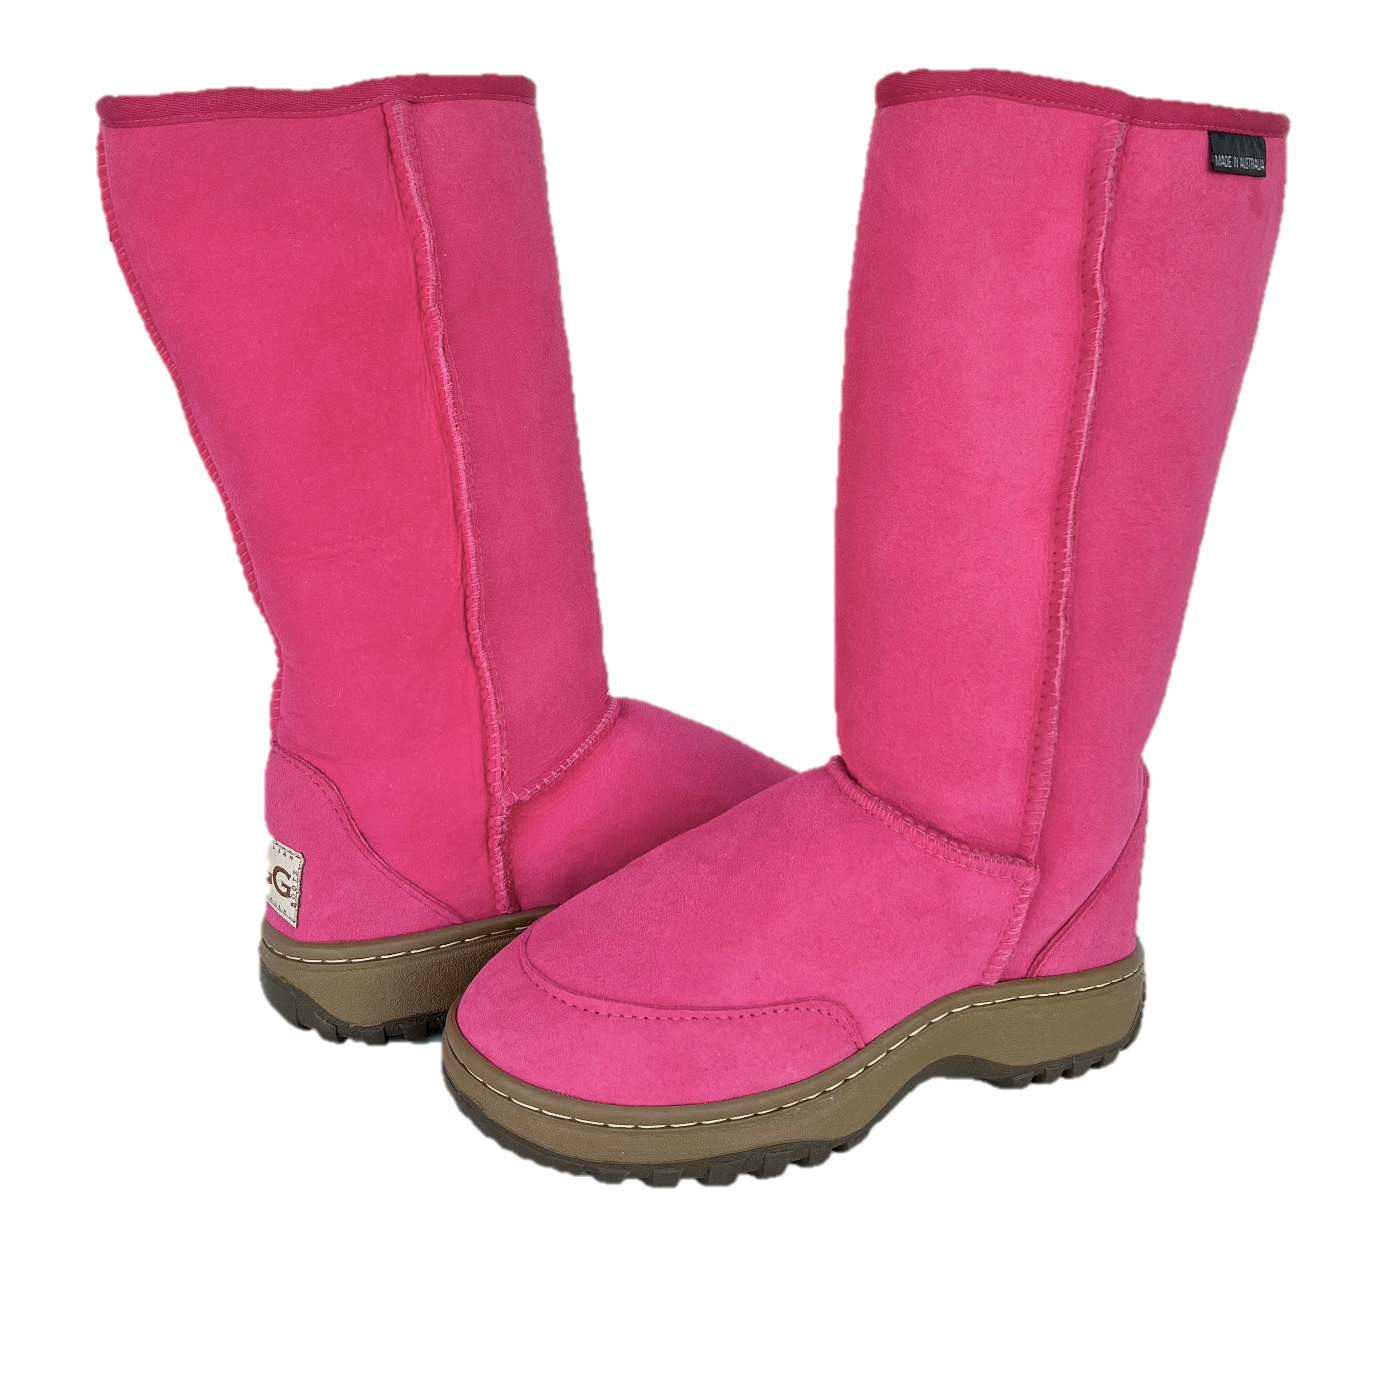 CLEARANCE OUTDOOR TALL BOOTS BRIGHT ROSE - AU WOMEN'S 6 | MEN'S 5